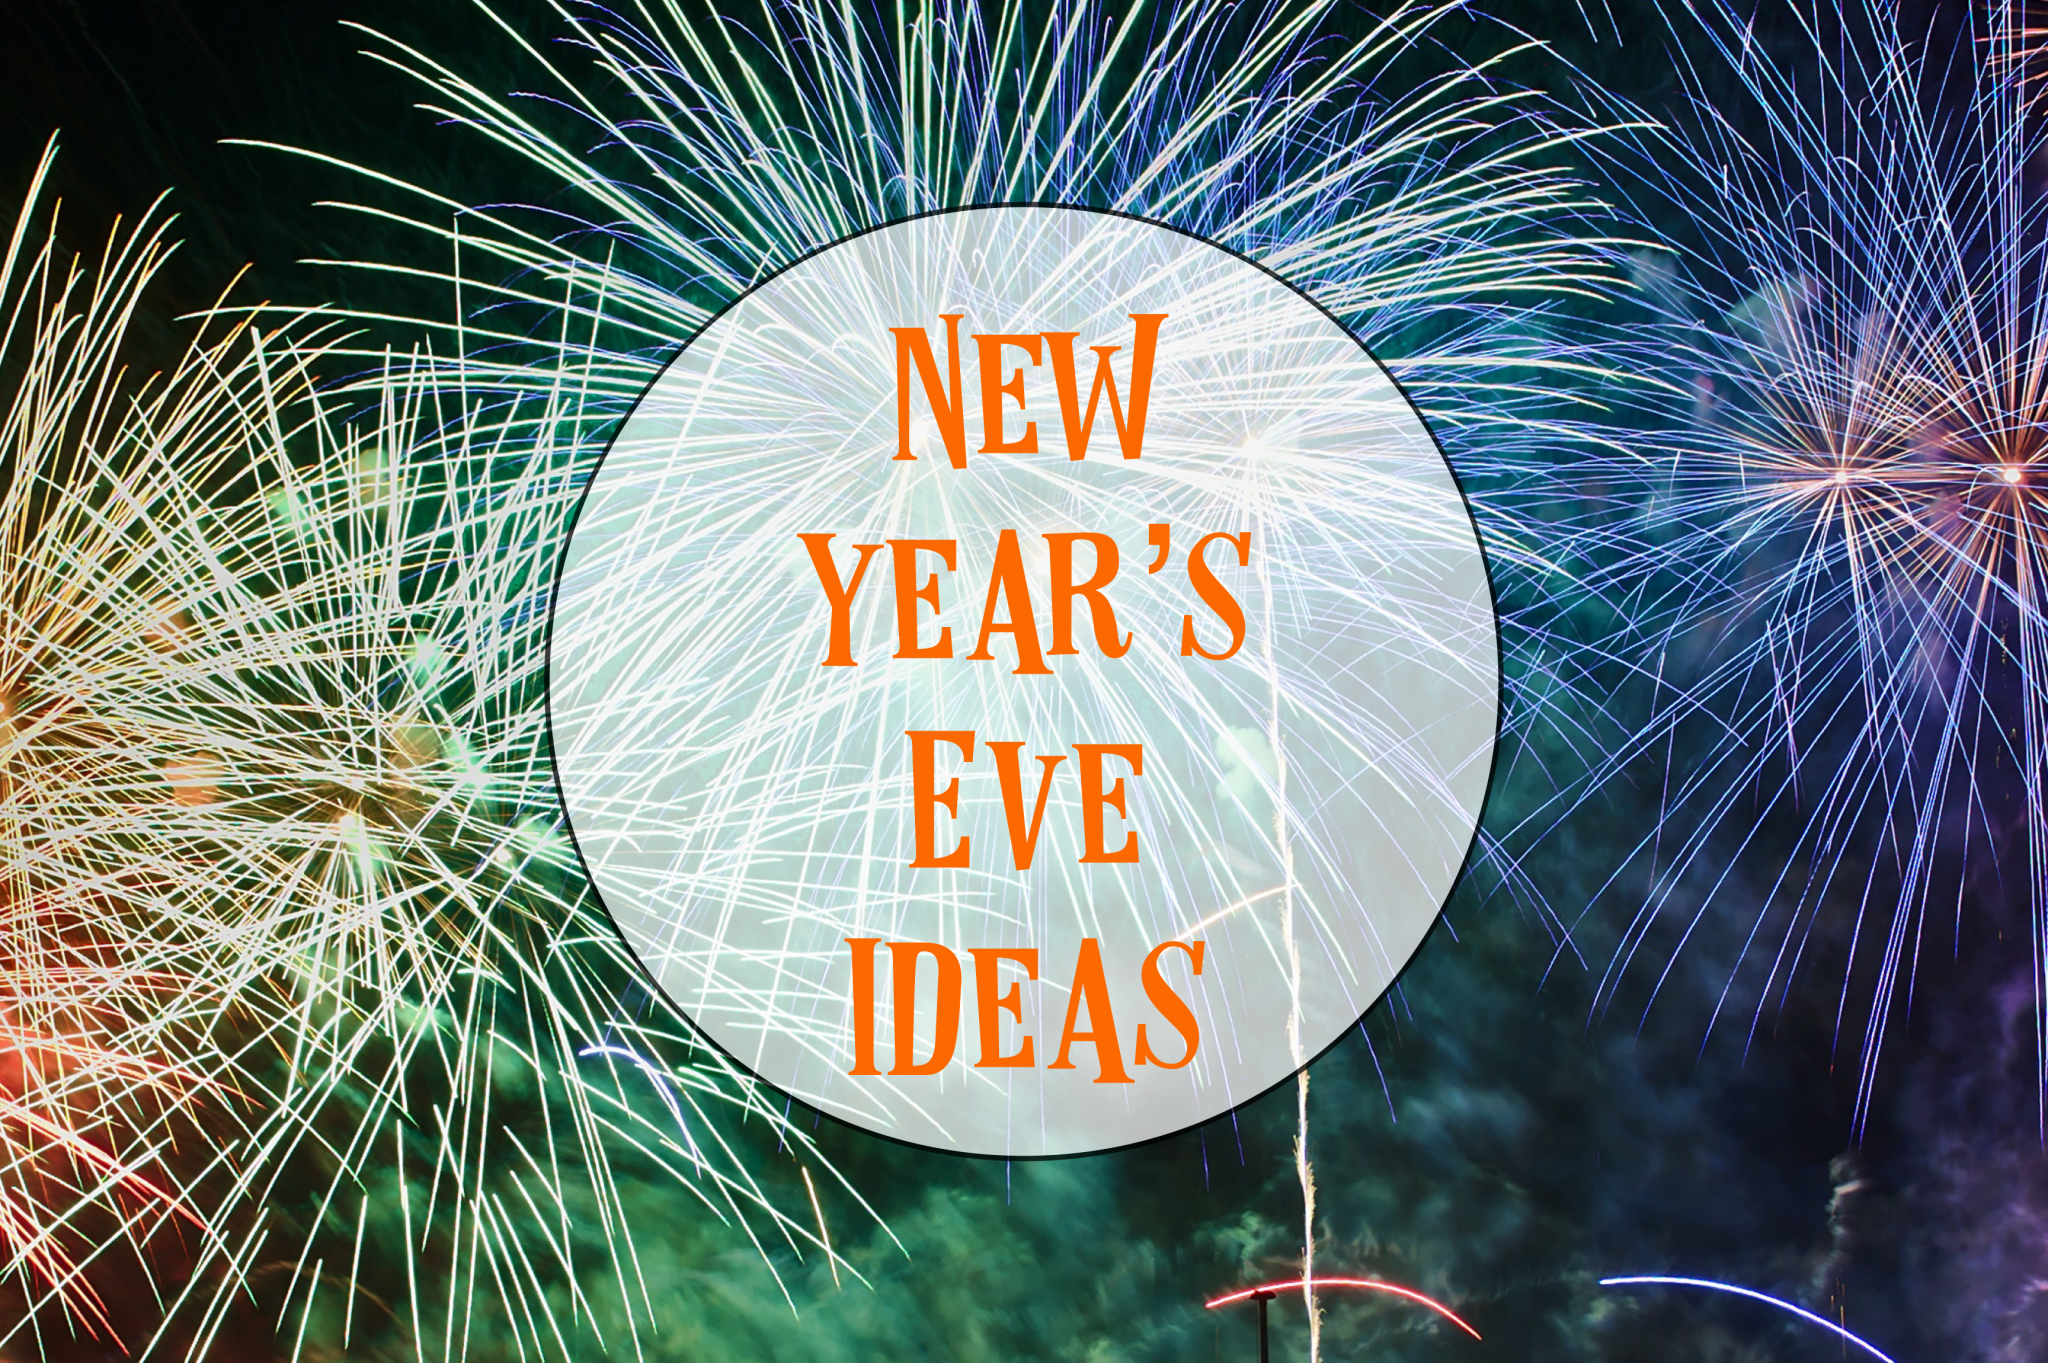 New Year’s Eve Ideas For Kids